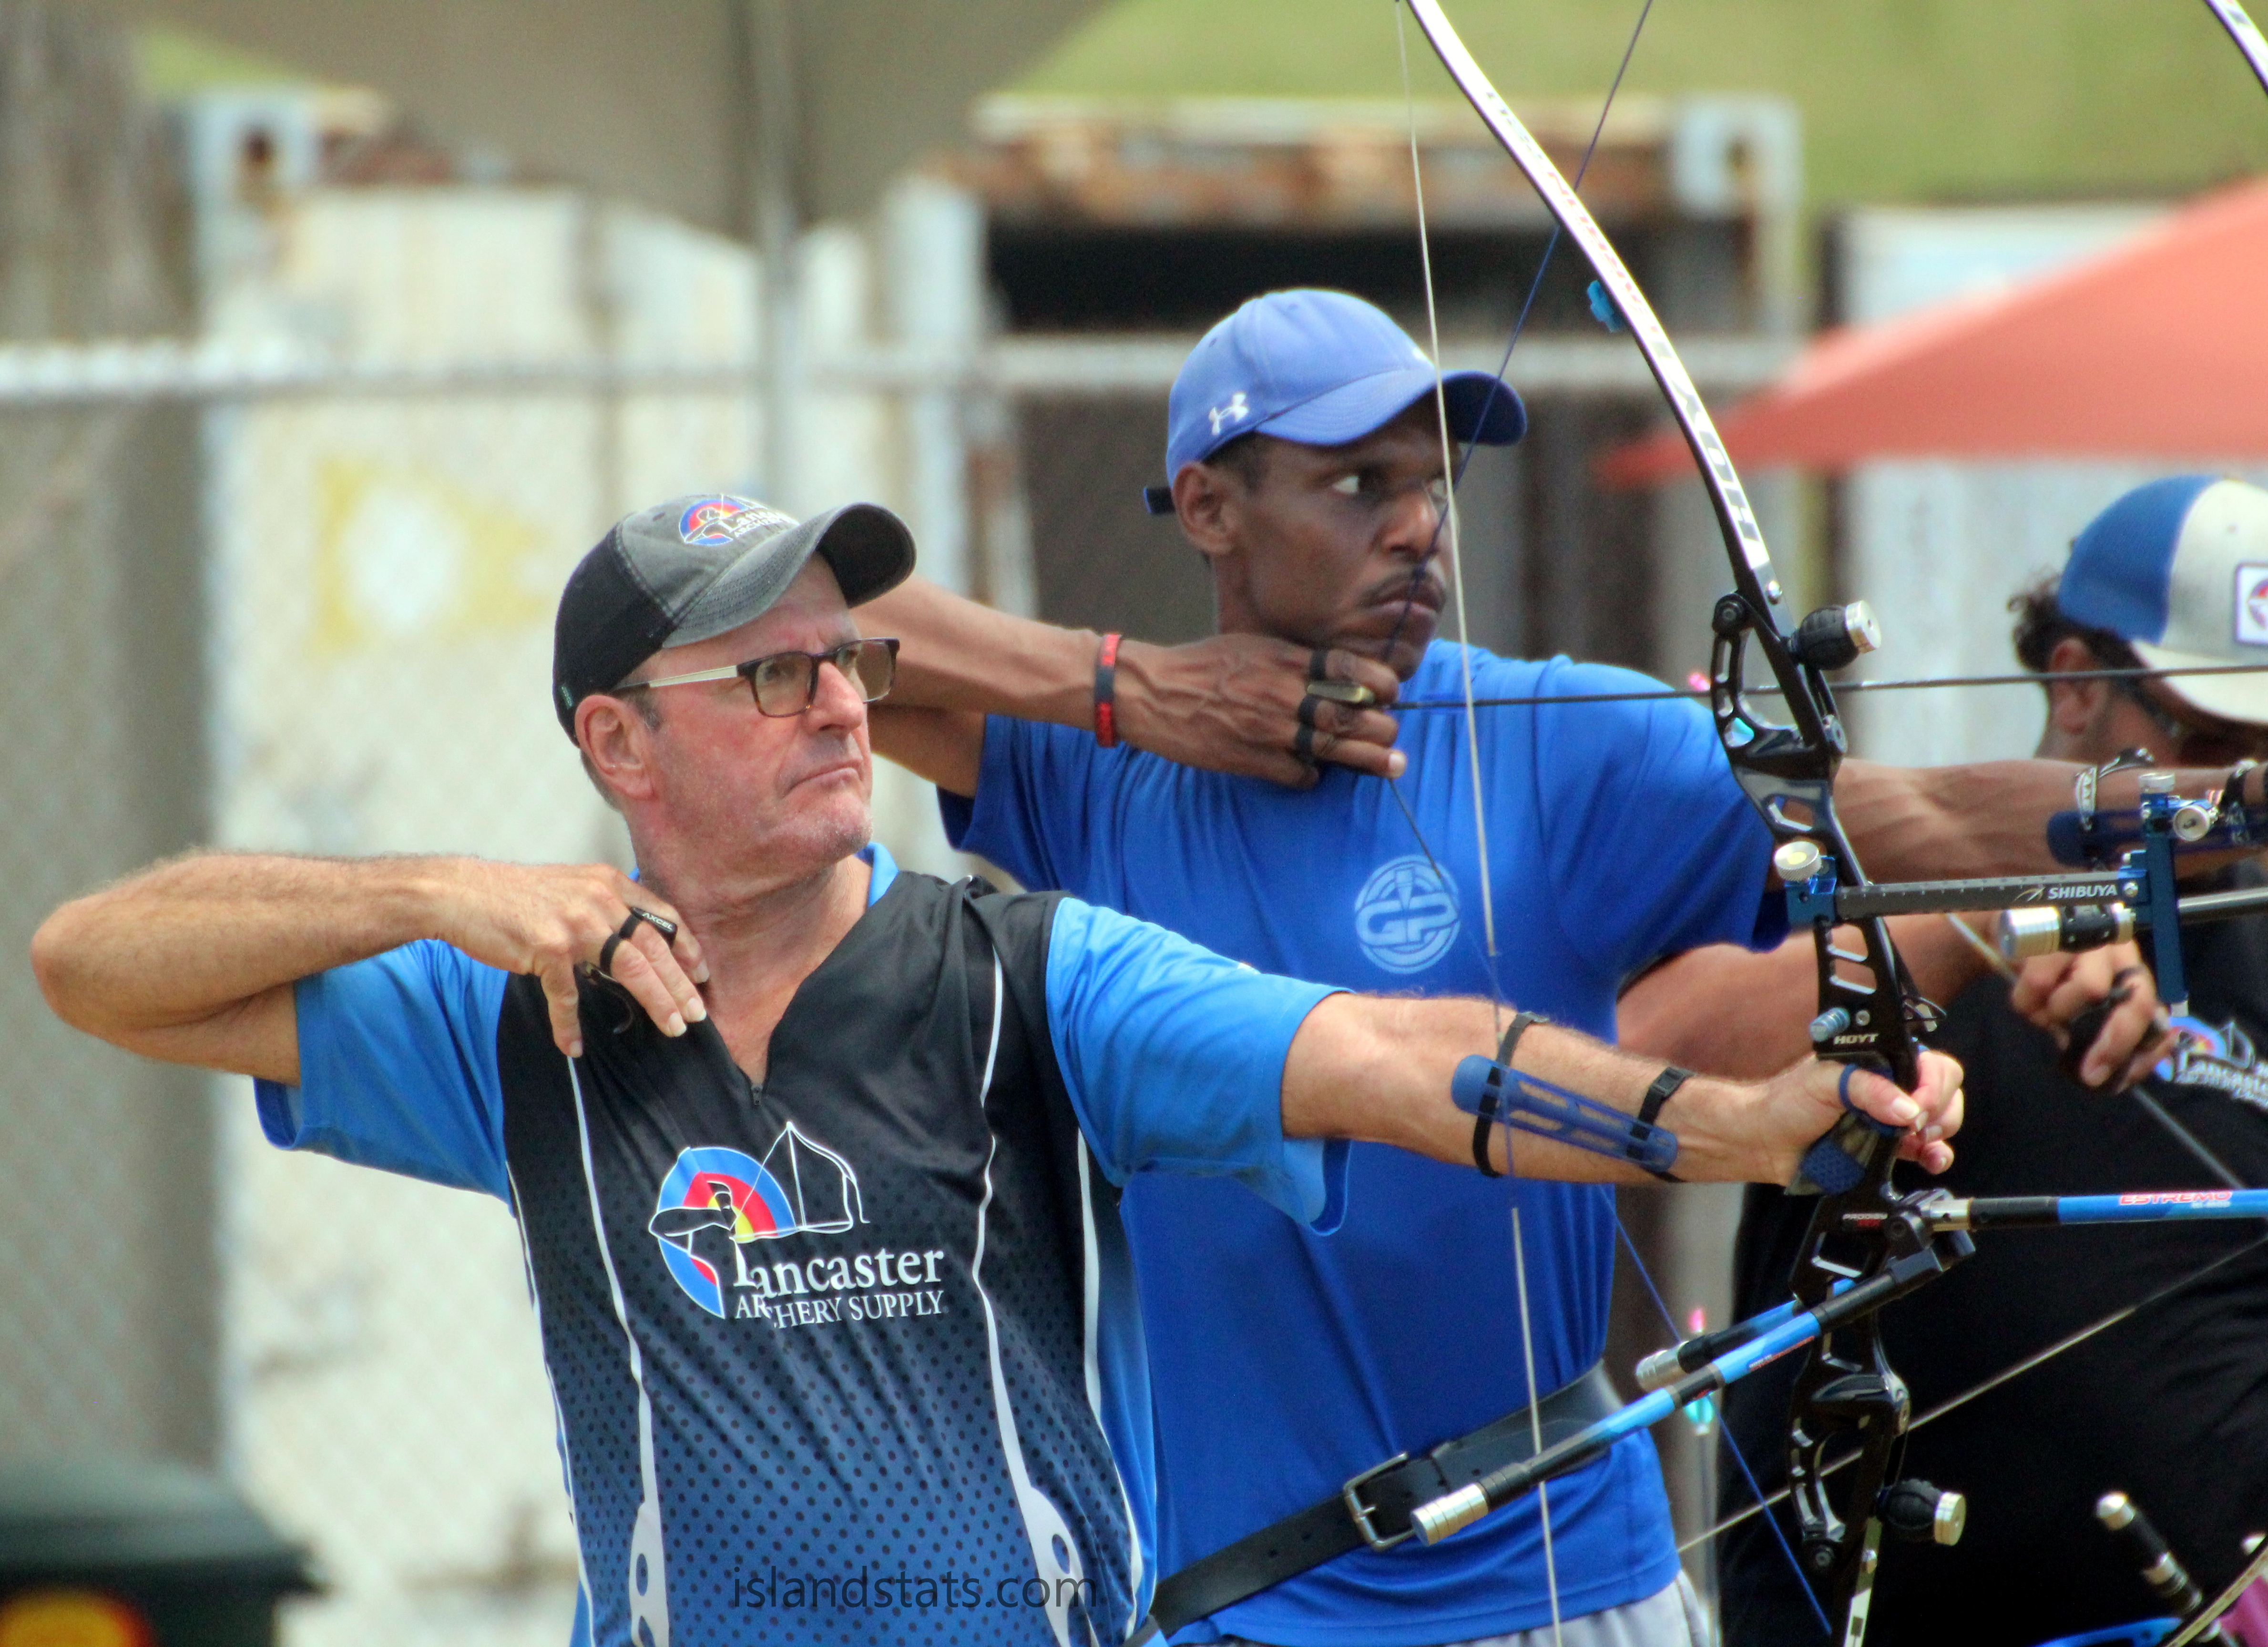 Bermuda Archers Strong Performances in Las Vegas Shoot (Other Sports)